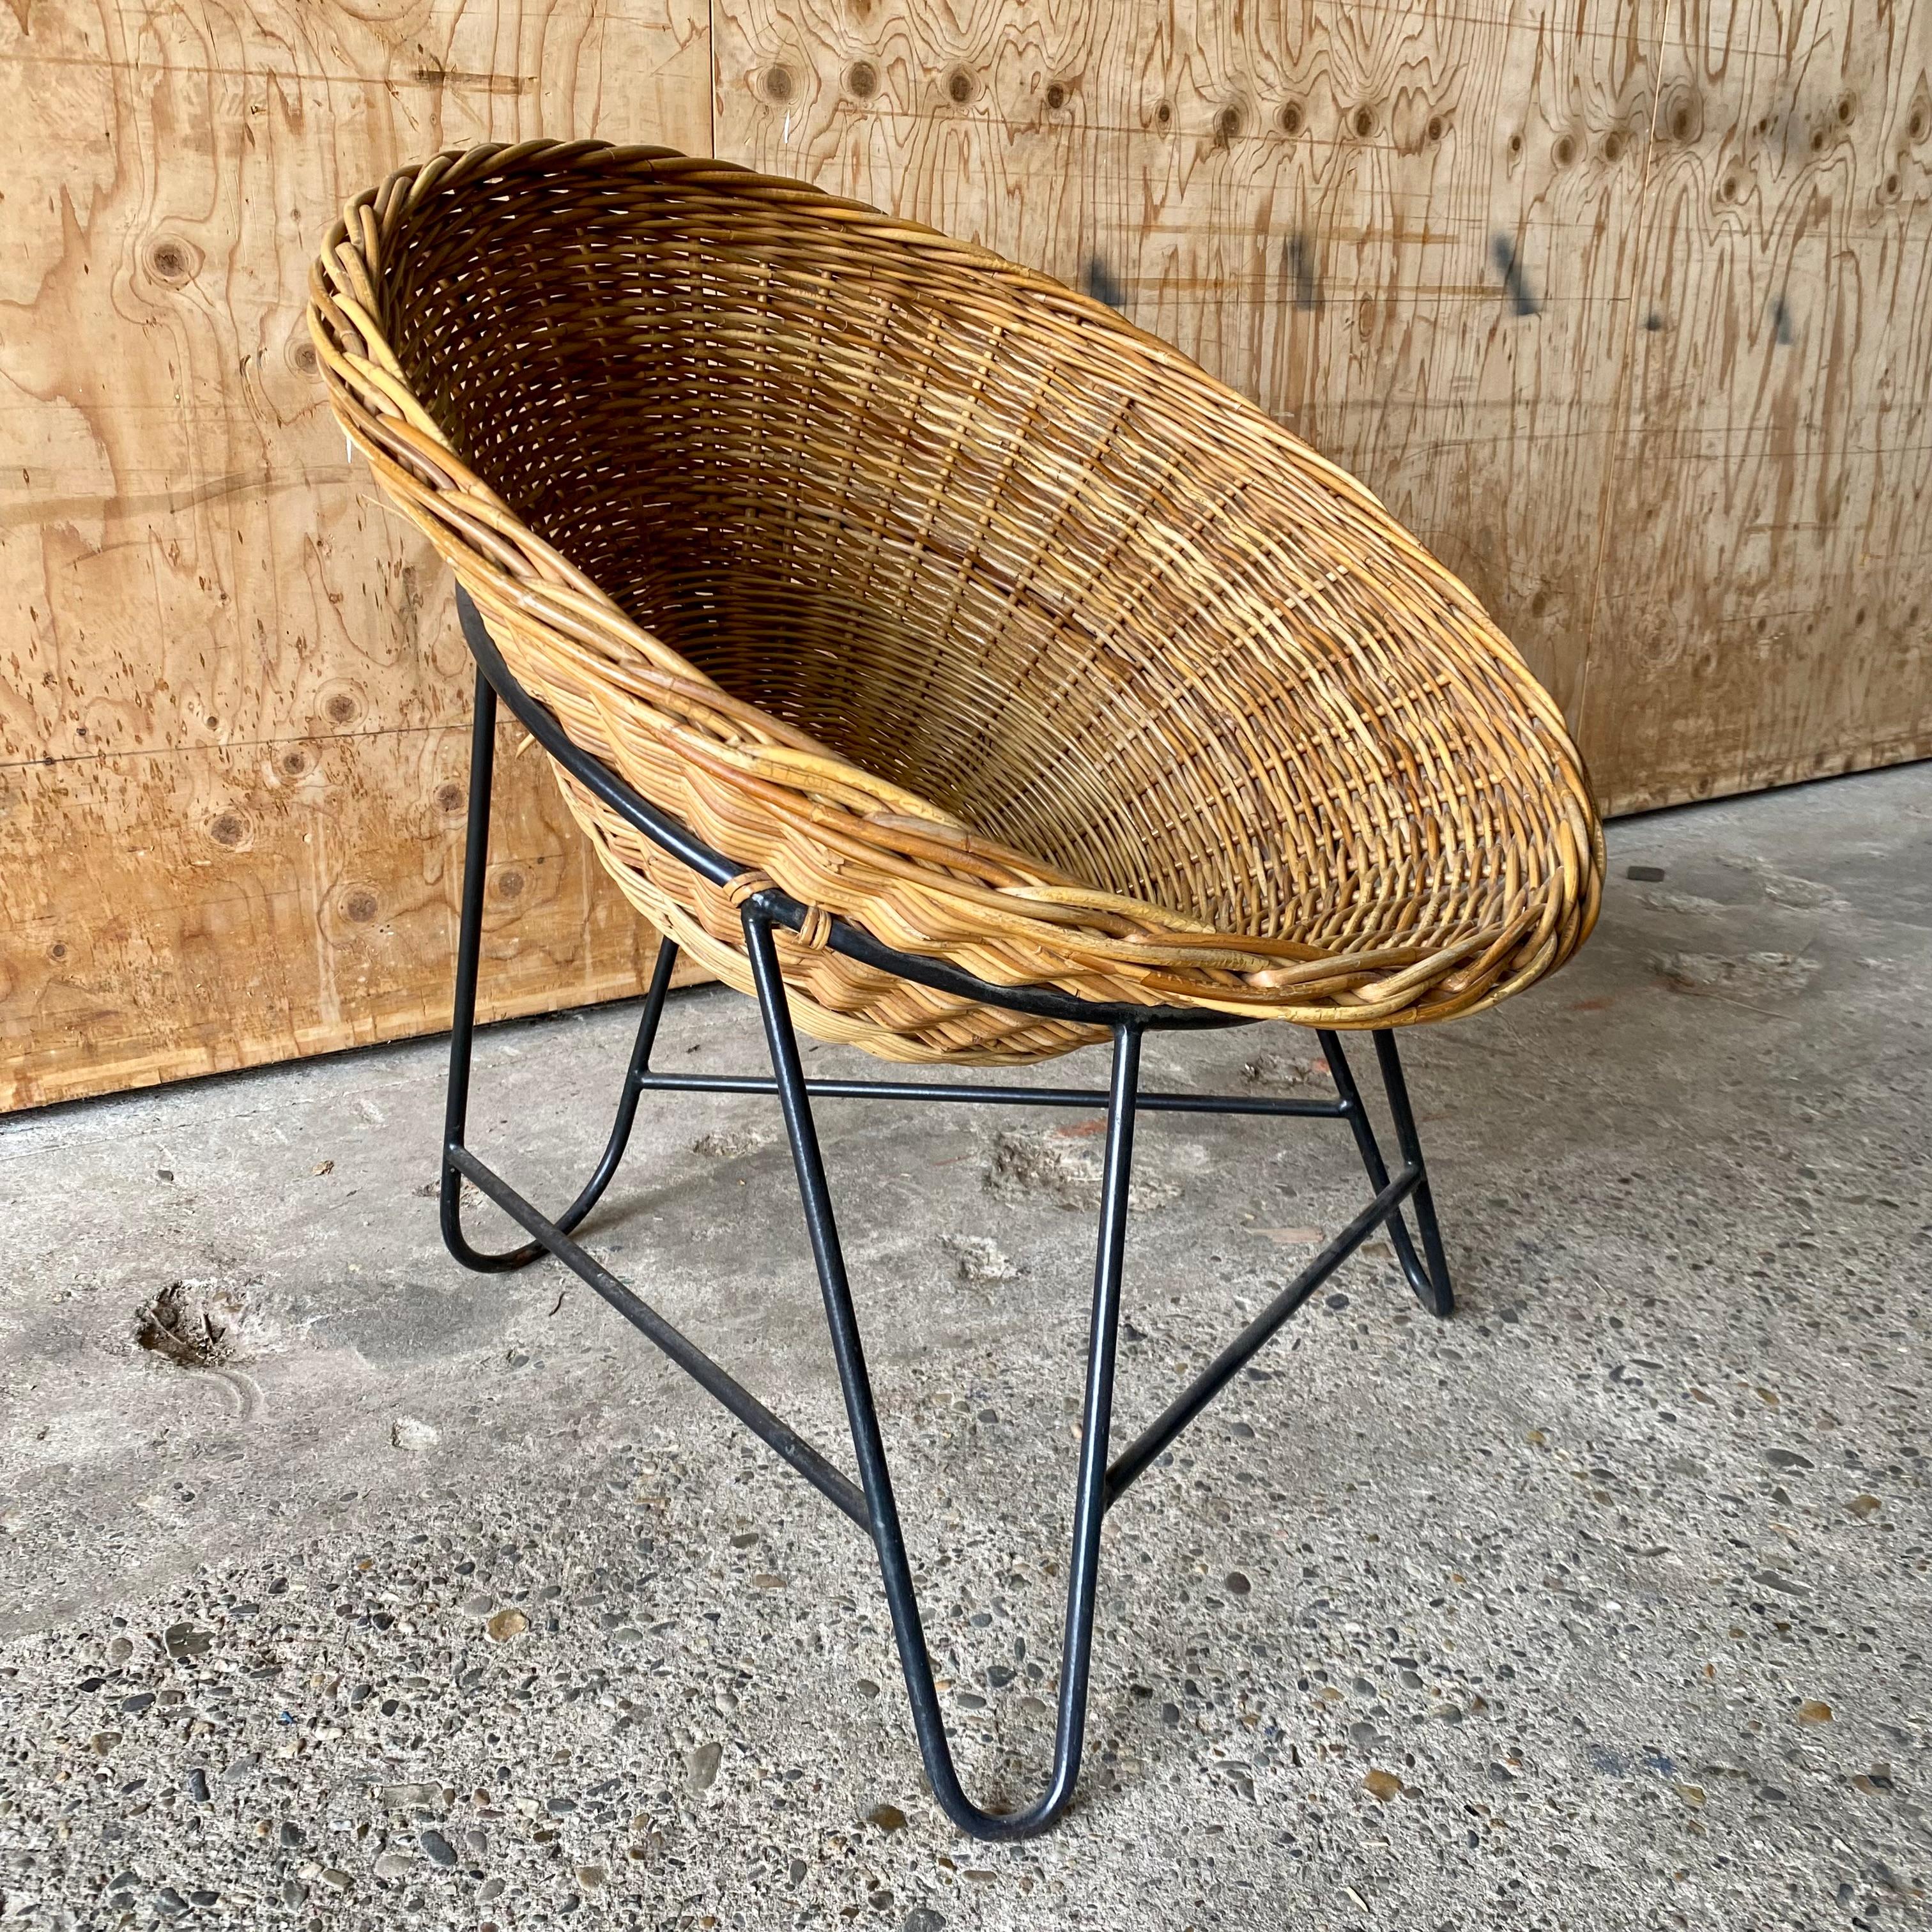 Looking for a unique and stylish lounge chair to add to your home, restaurant, hotel or office? Look no further than the Rattan lounge chairs by Dirk van Sliedregt for Gebr. Jonkers, a classic example of Dutch Design from the 1960s.

Crafted with a